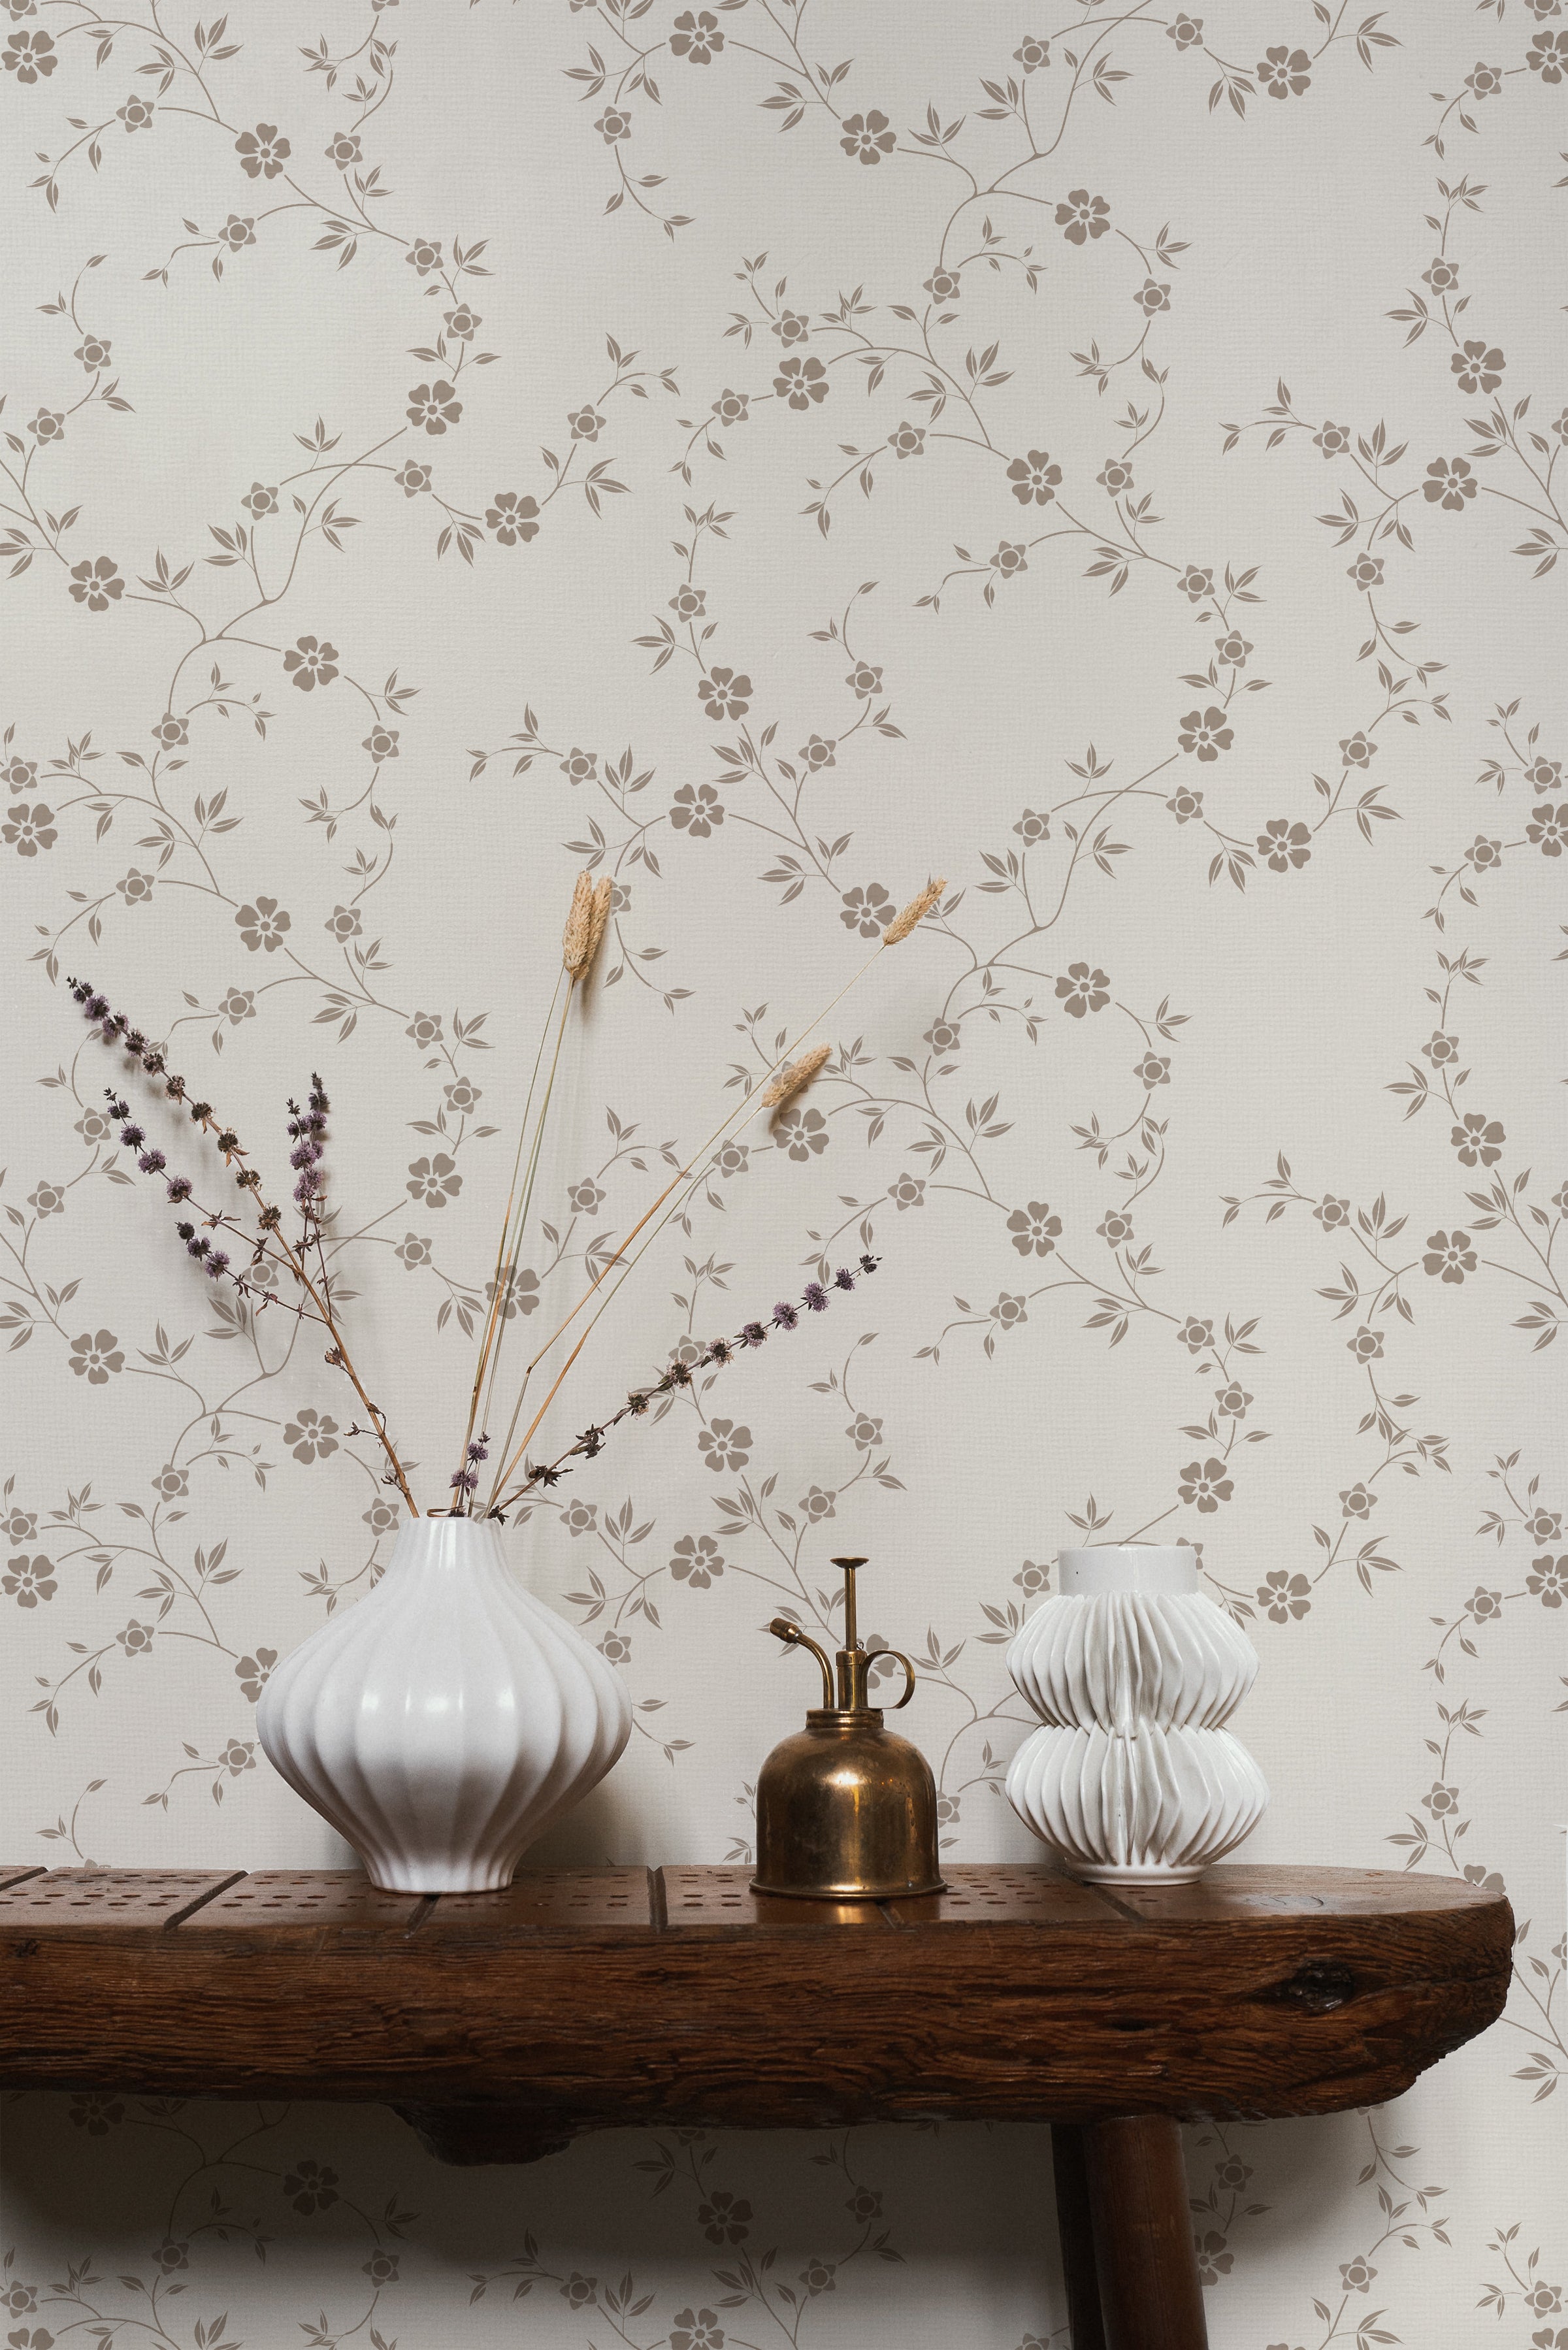 A close-up of 'Charming Floral Wallpaper', showcasing its intricate design of beige flowers connected by thin vines on a creamy background. The pattern radiates a vintage elegance, perfect for a timeless interior.